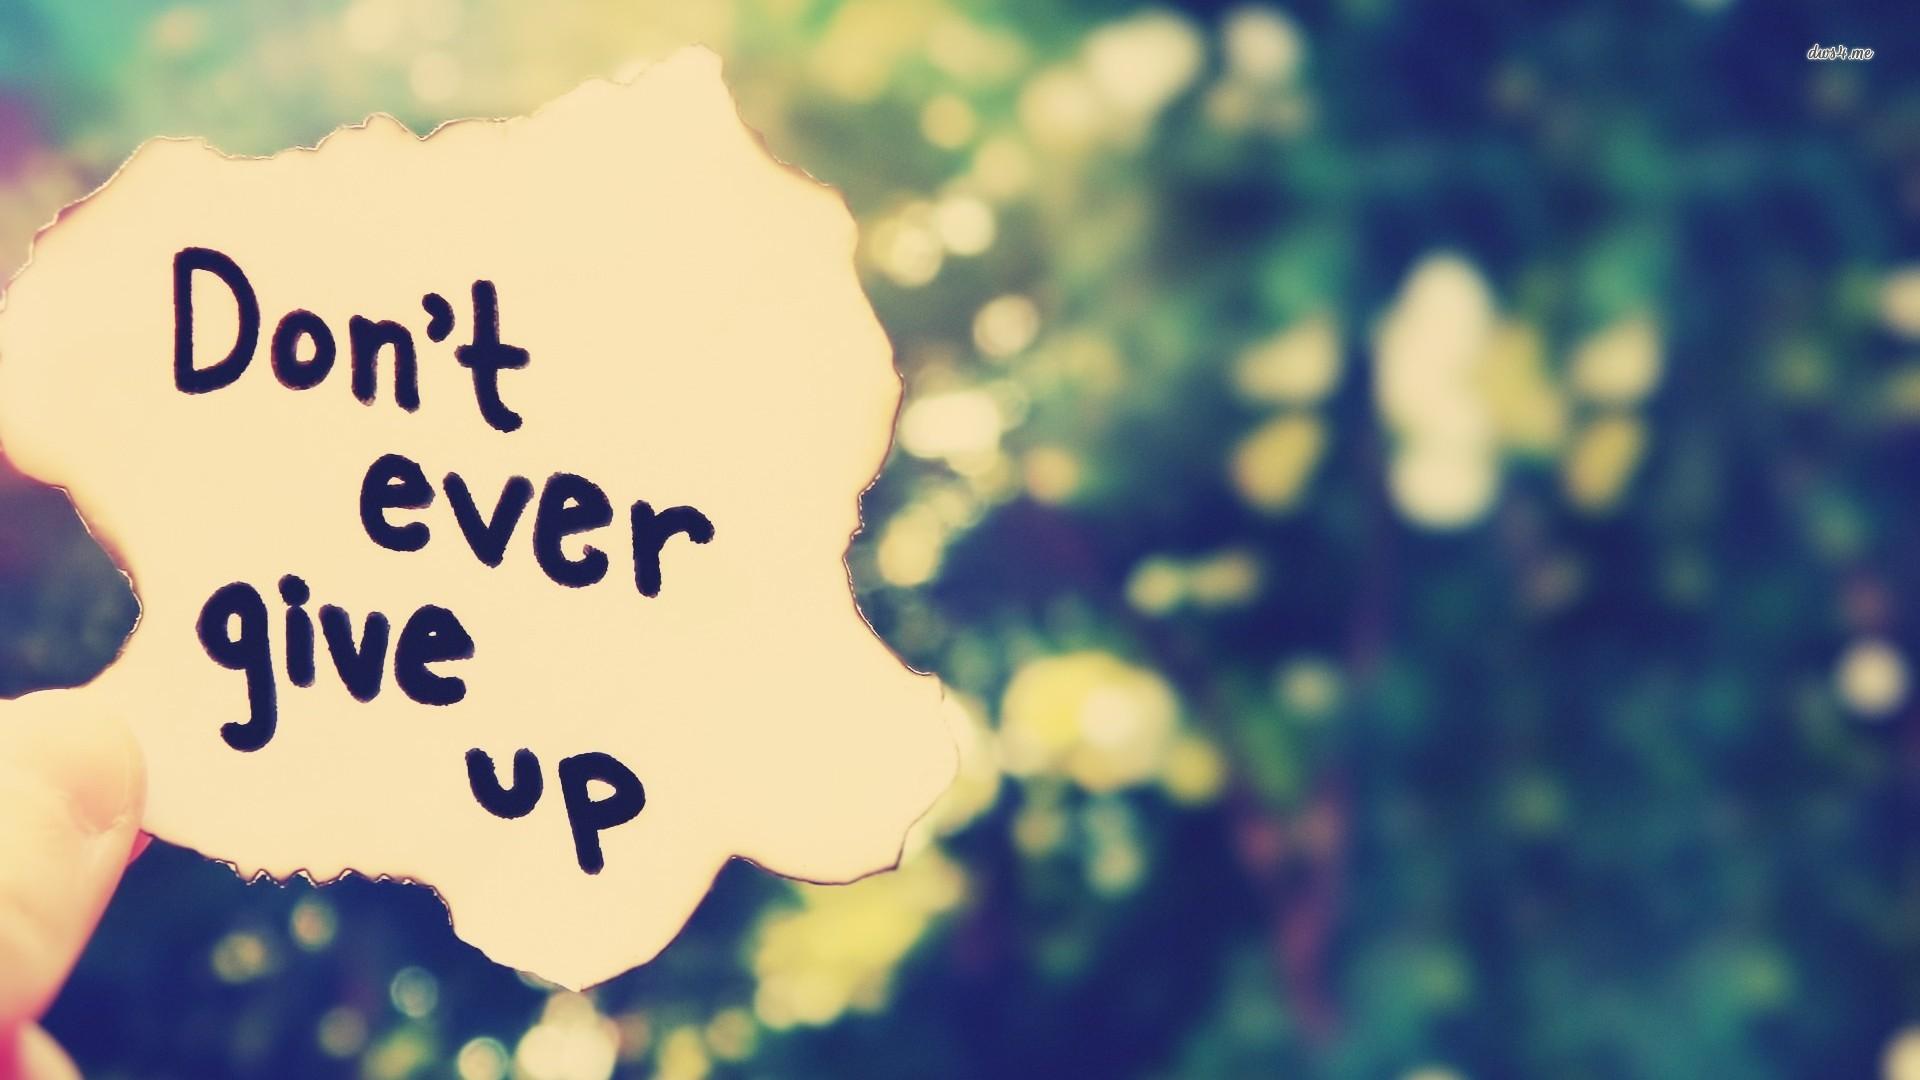 Don't Give Up Wallpaper, #SFD 7674